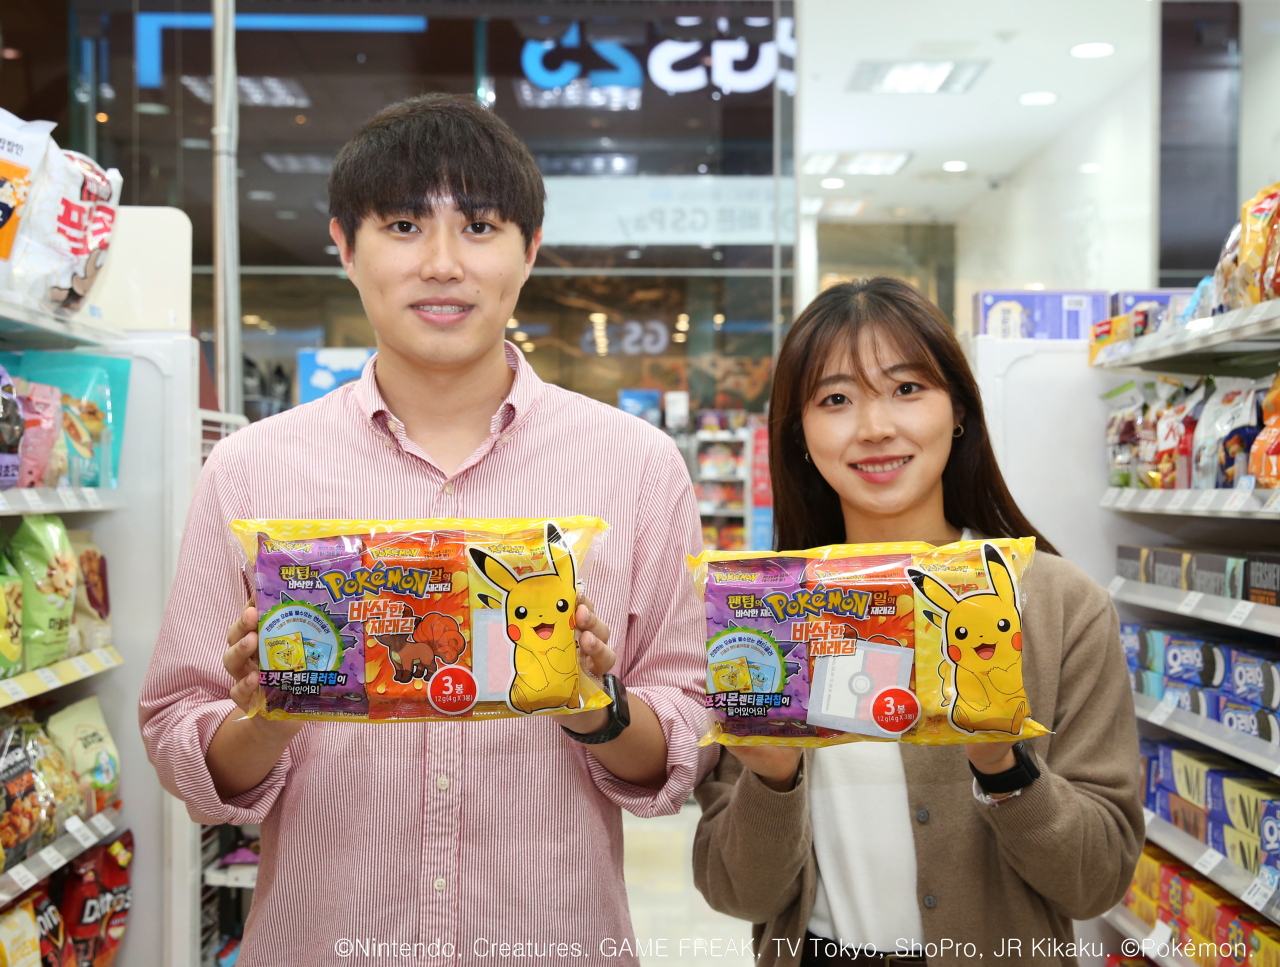 Models hold packs of Pokemon Dried Laver at a GS25 store in Seoul. (GS25)